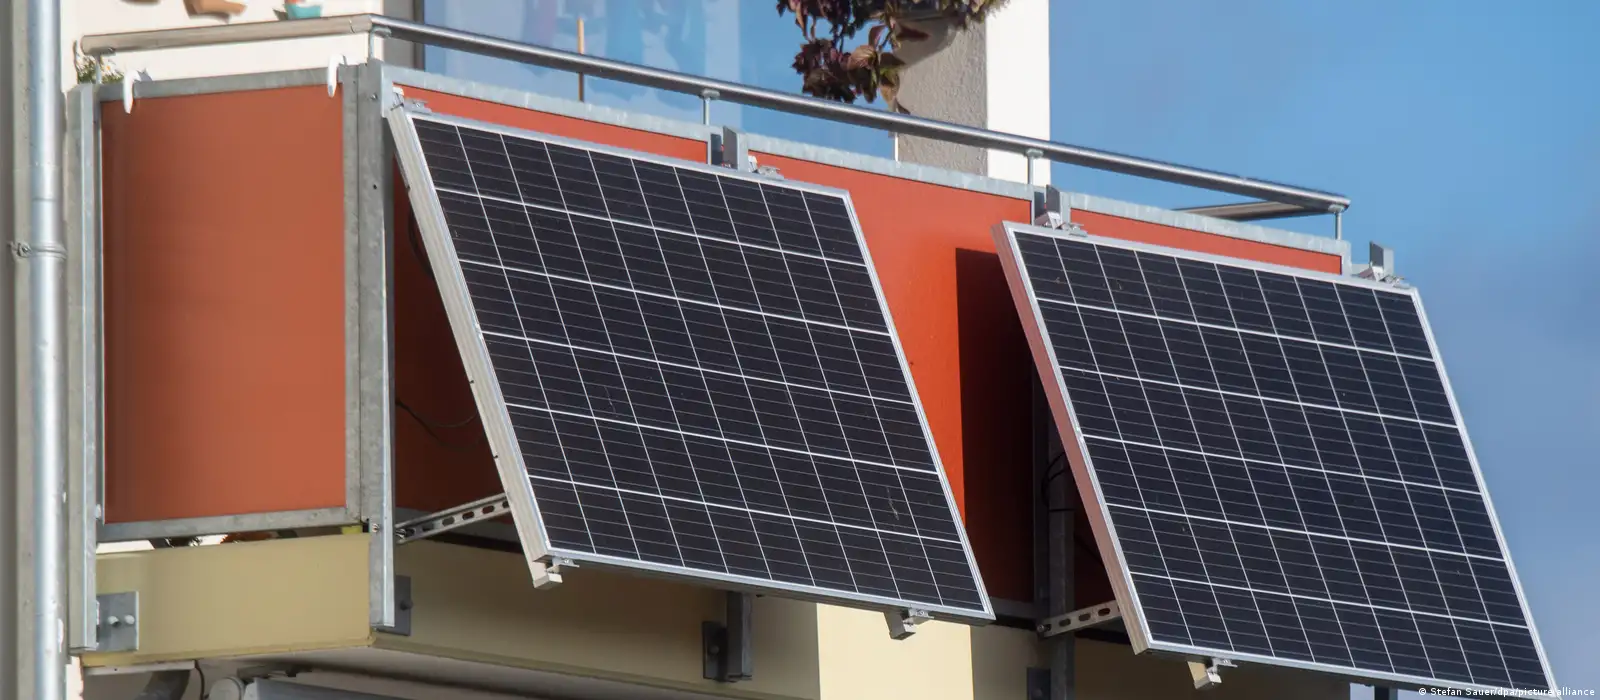 Do solar panels have to be on the roof? Four other places to install panels